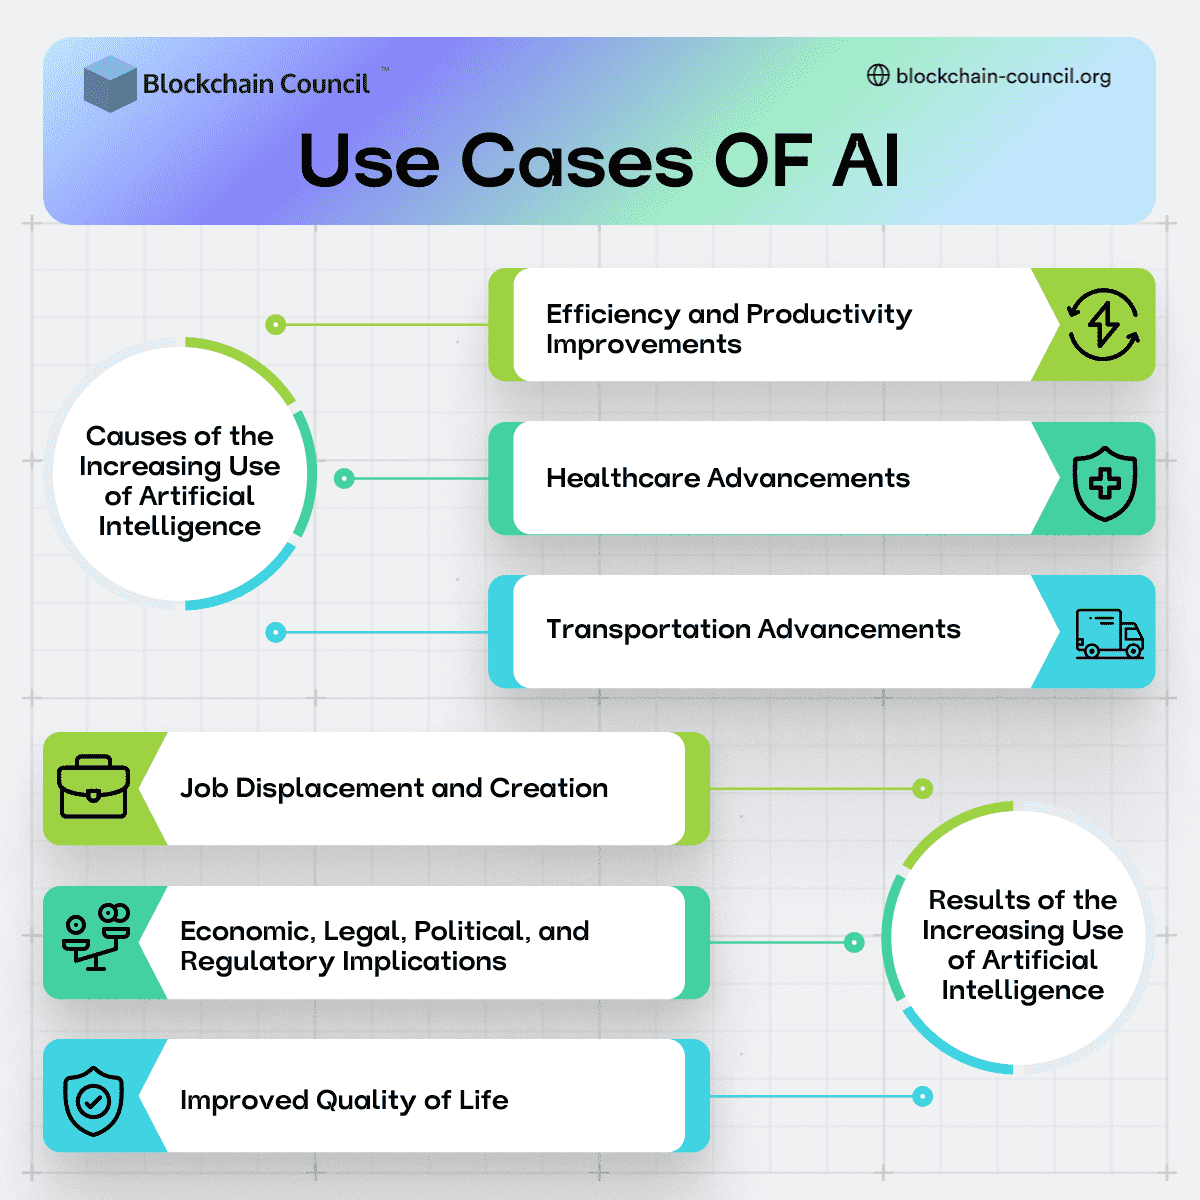 Use Cases OF AI